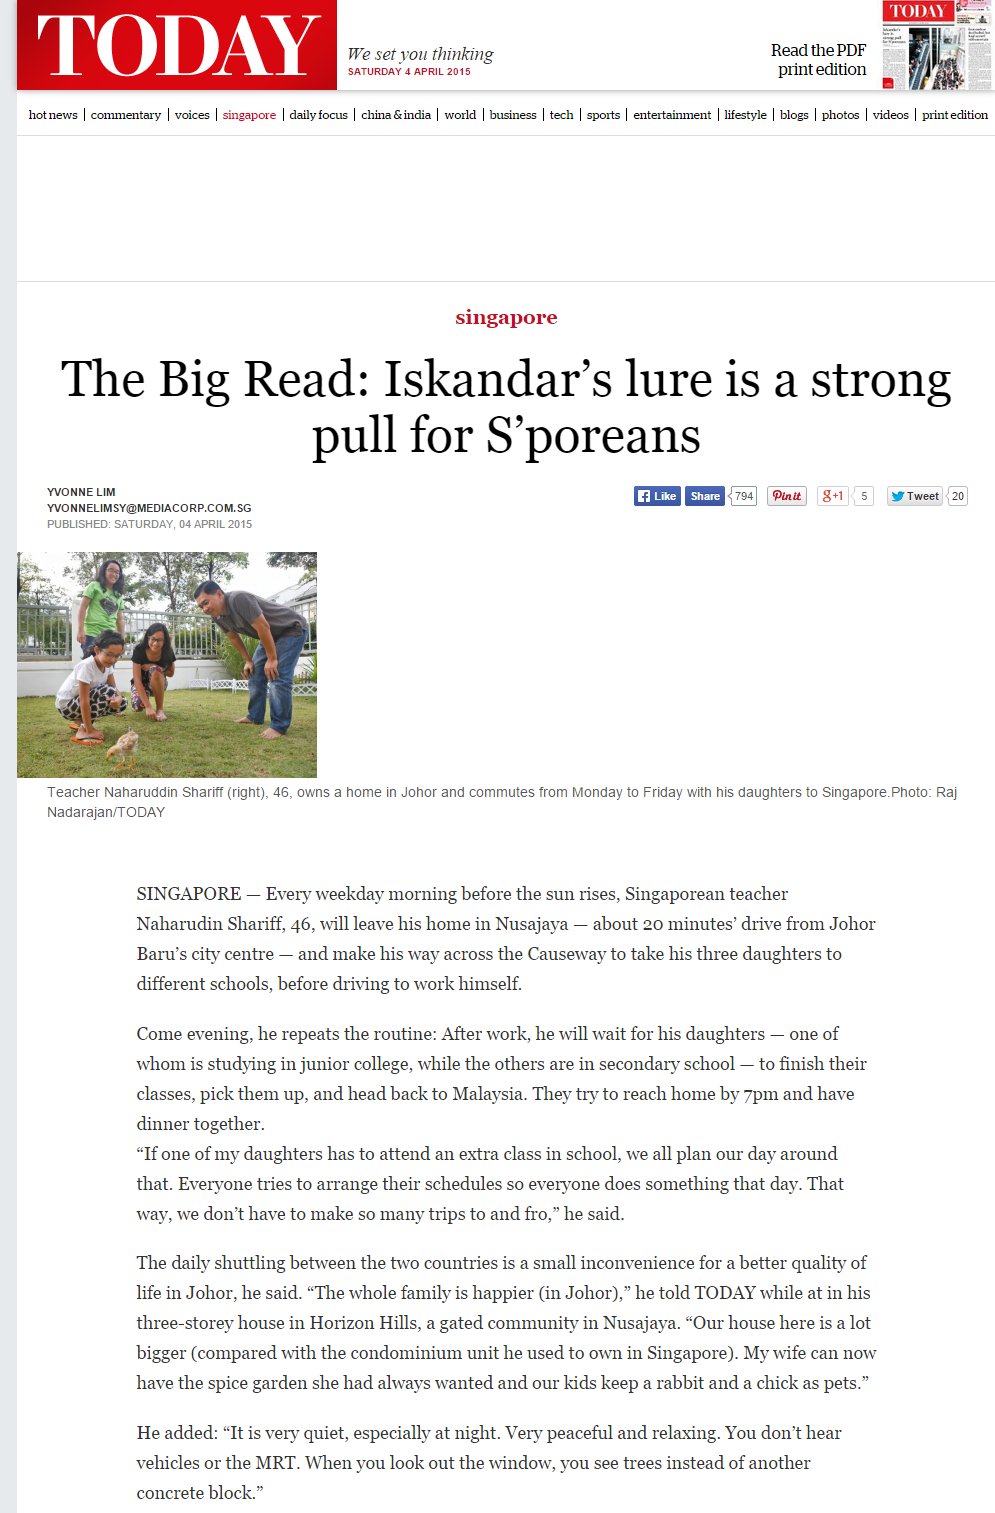 Malaysia Iskandar 040415 -  Iskander’s lure is a strong pull for S’poreans